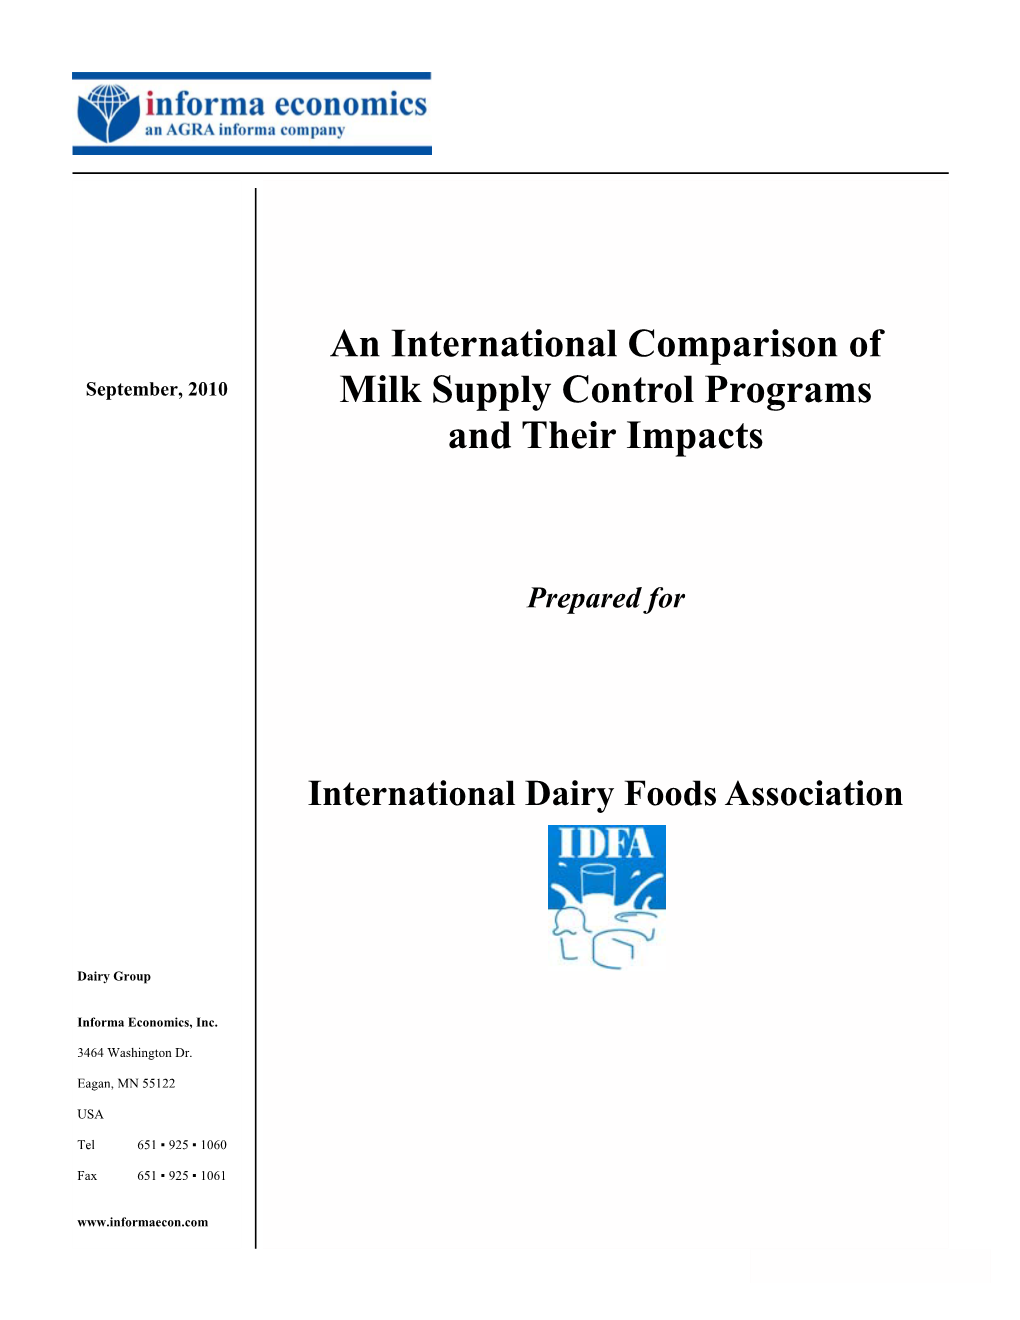 An International Comparison of Milk Supply Control Programs and Their Impacts